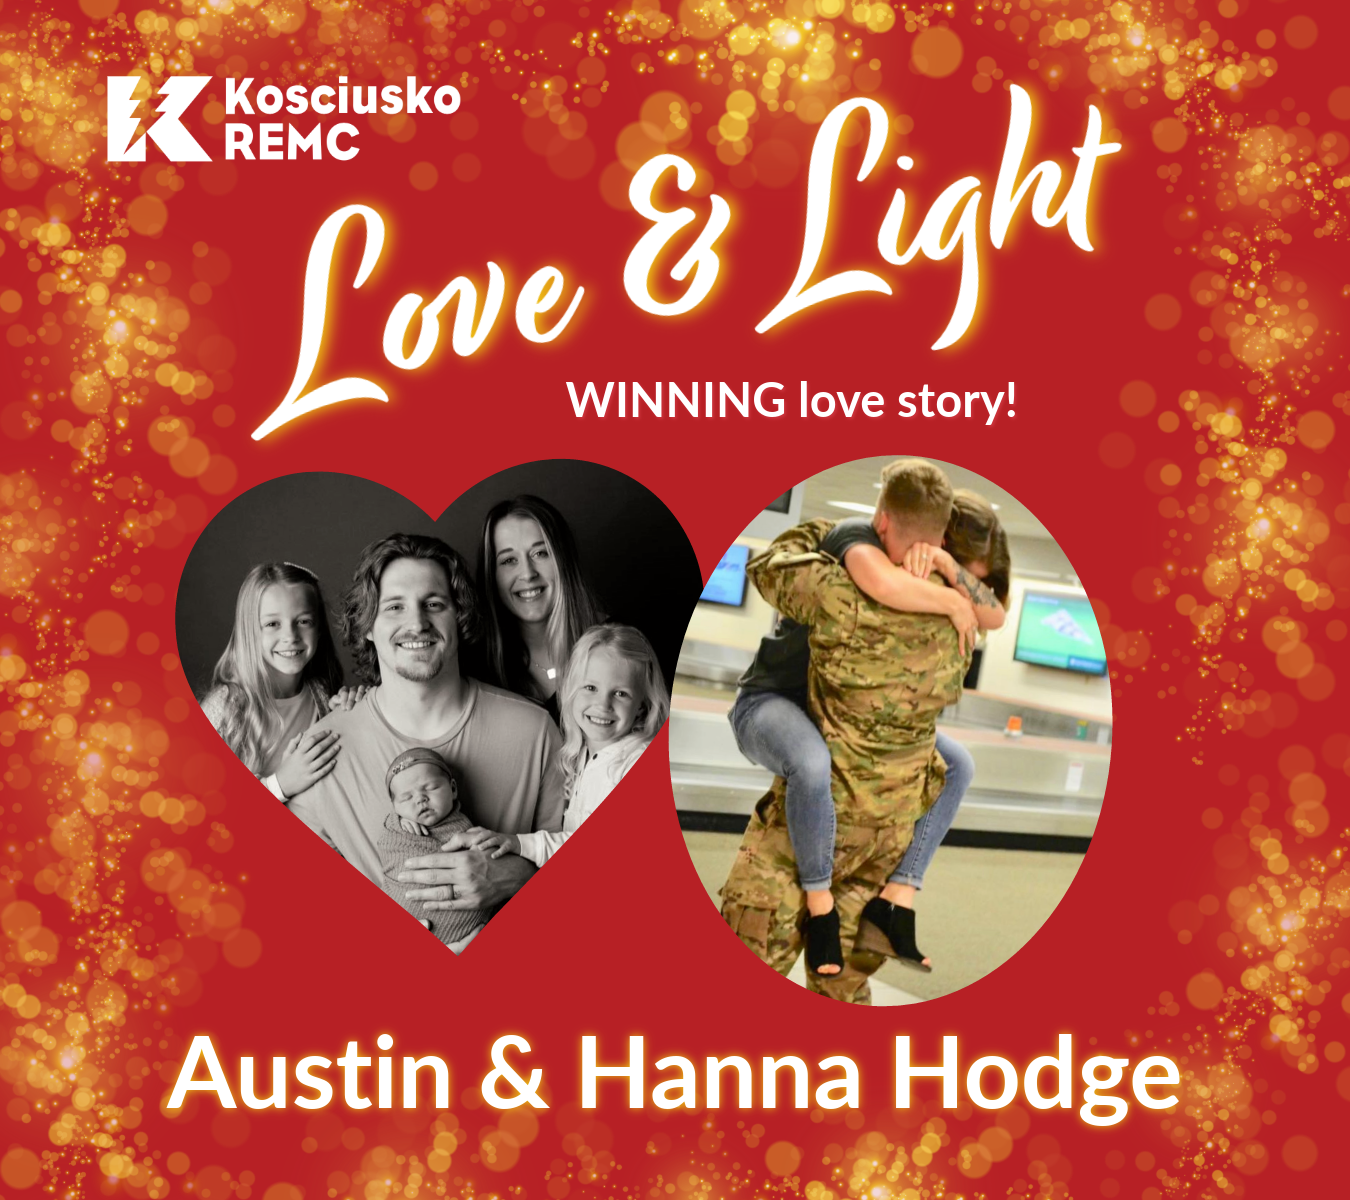 Two photos from Love & Light winner Hanna Hodge display Austin and Hanna and their family.